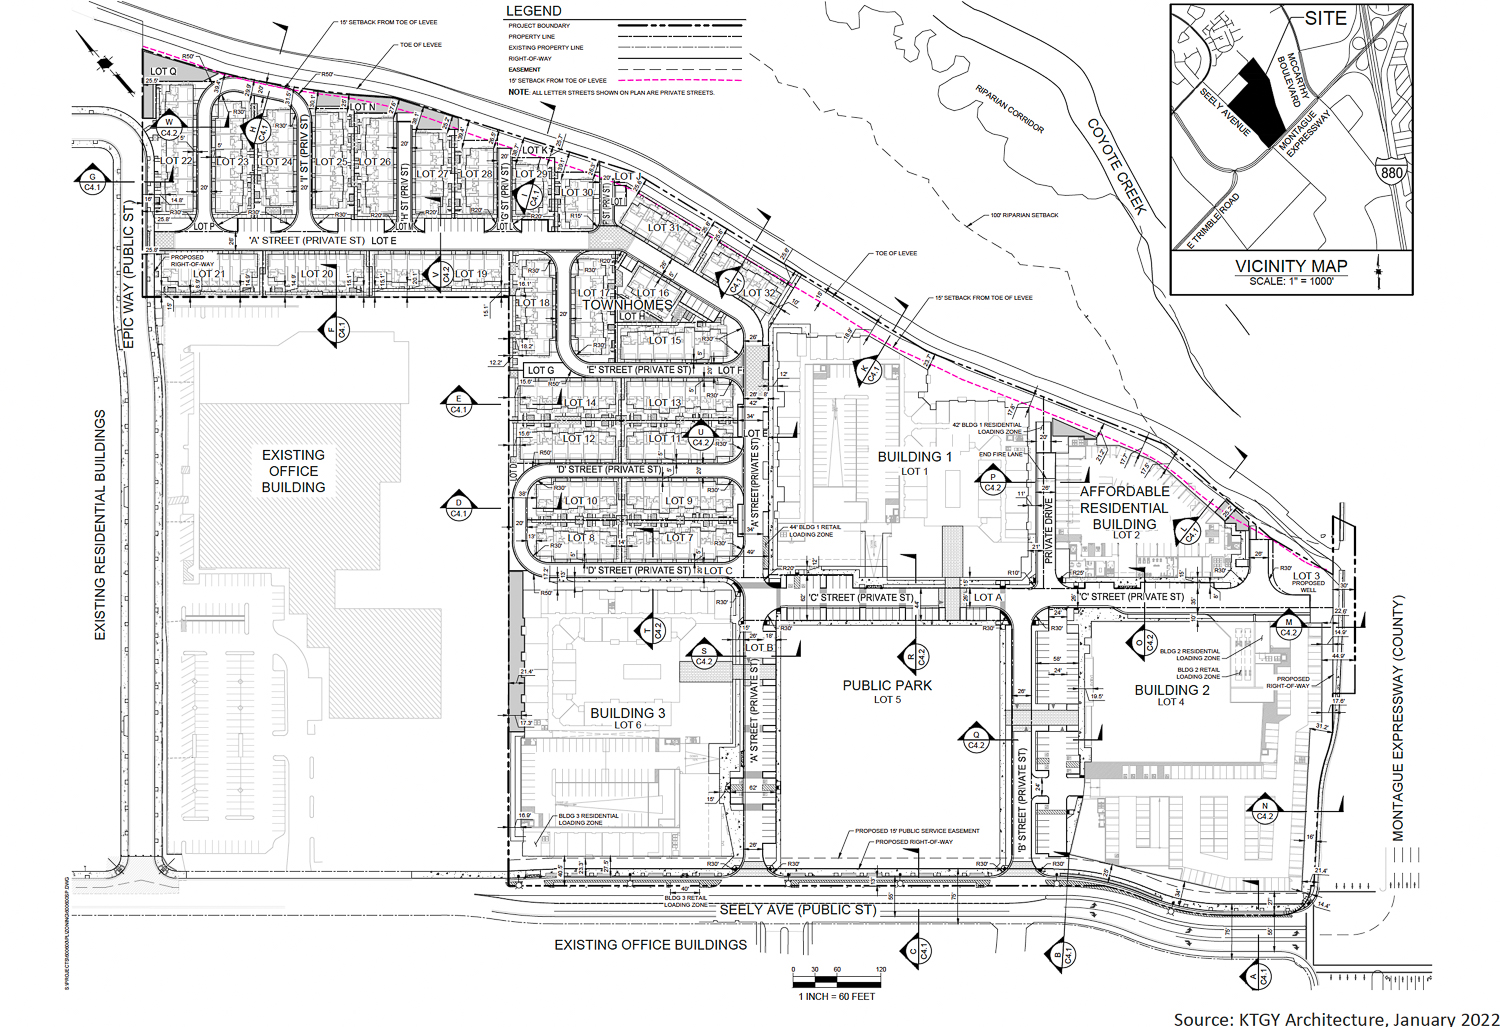 0 Seely Avenue site map, image by KTGY